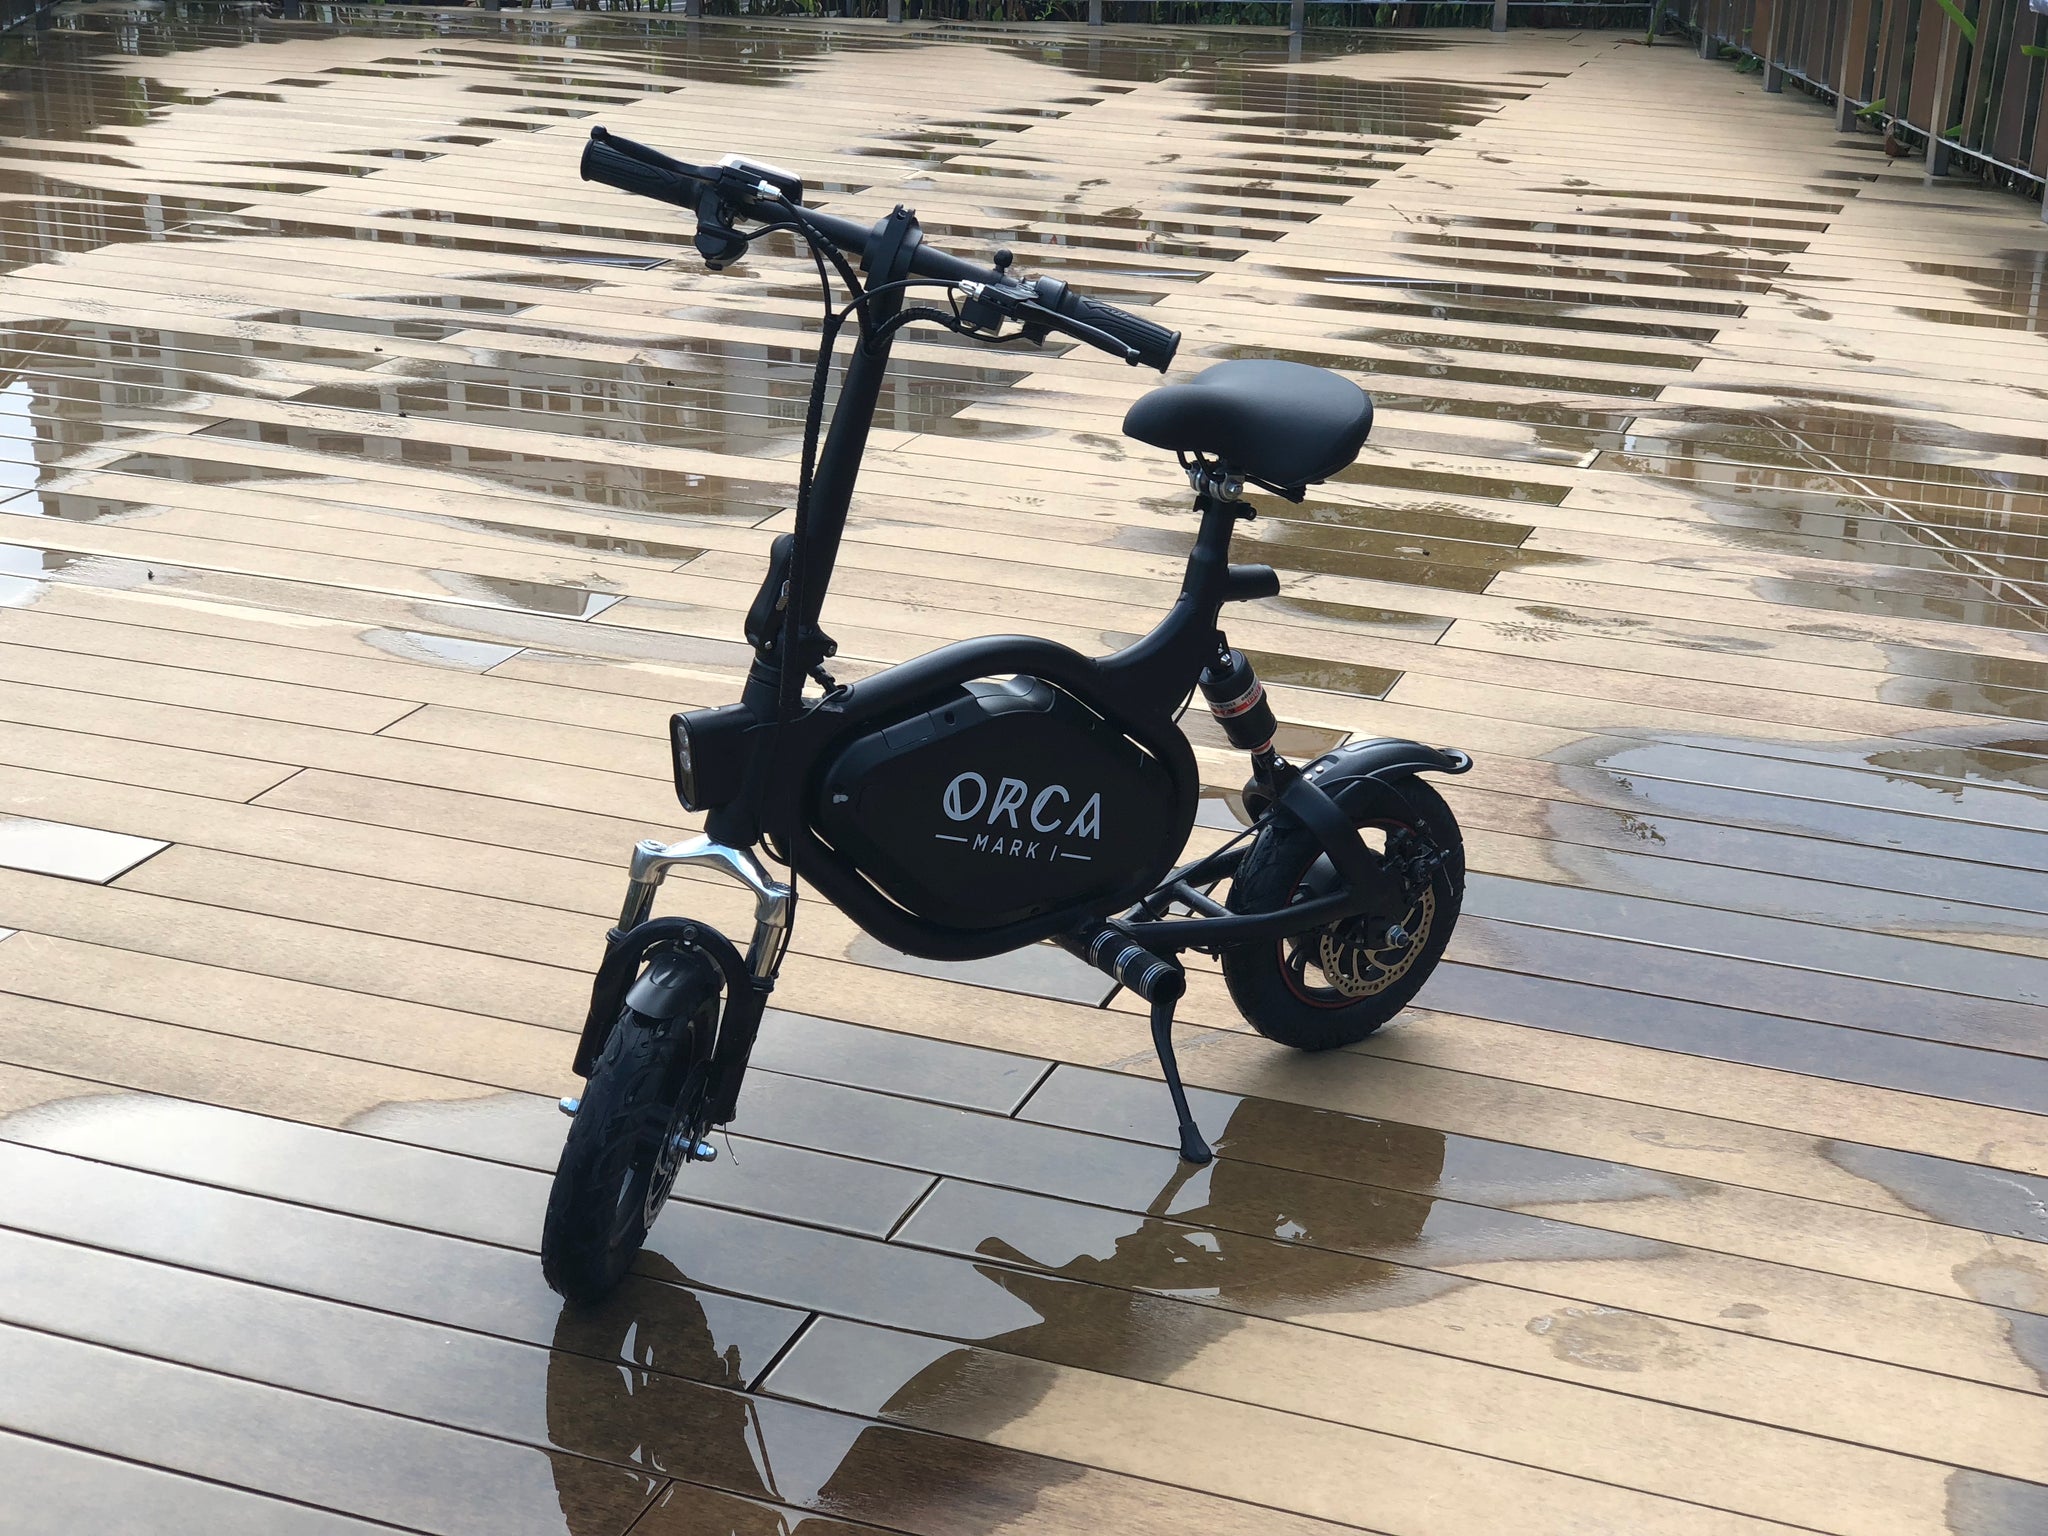 orca mark I electric scooter IP54 waterproof rating